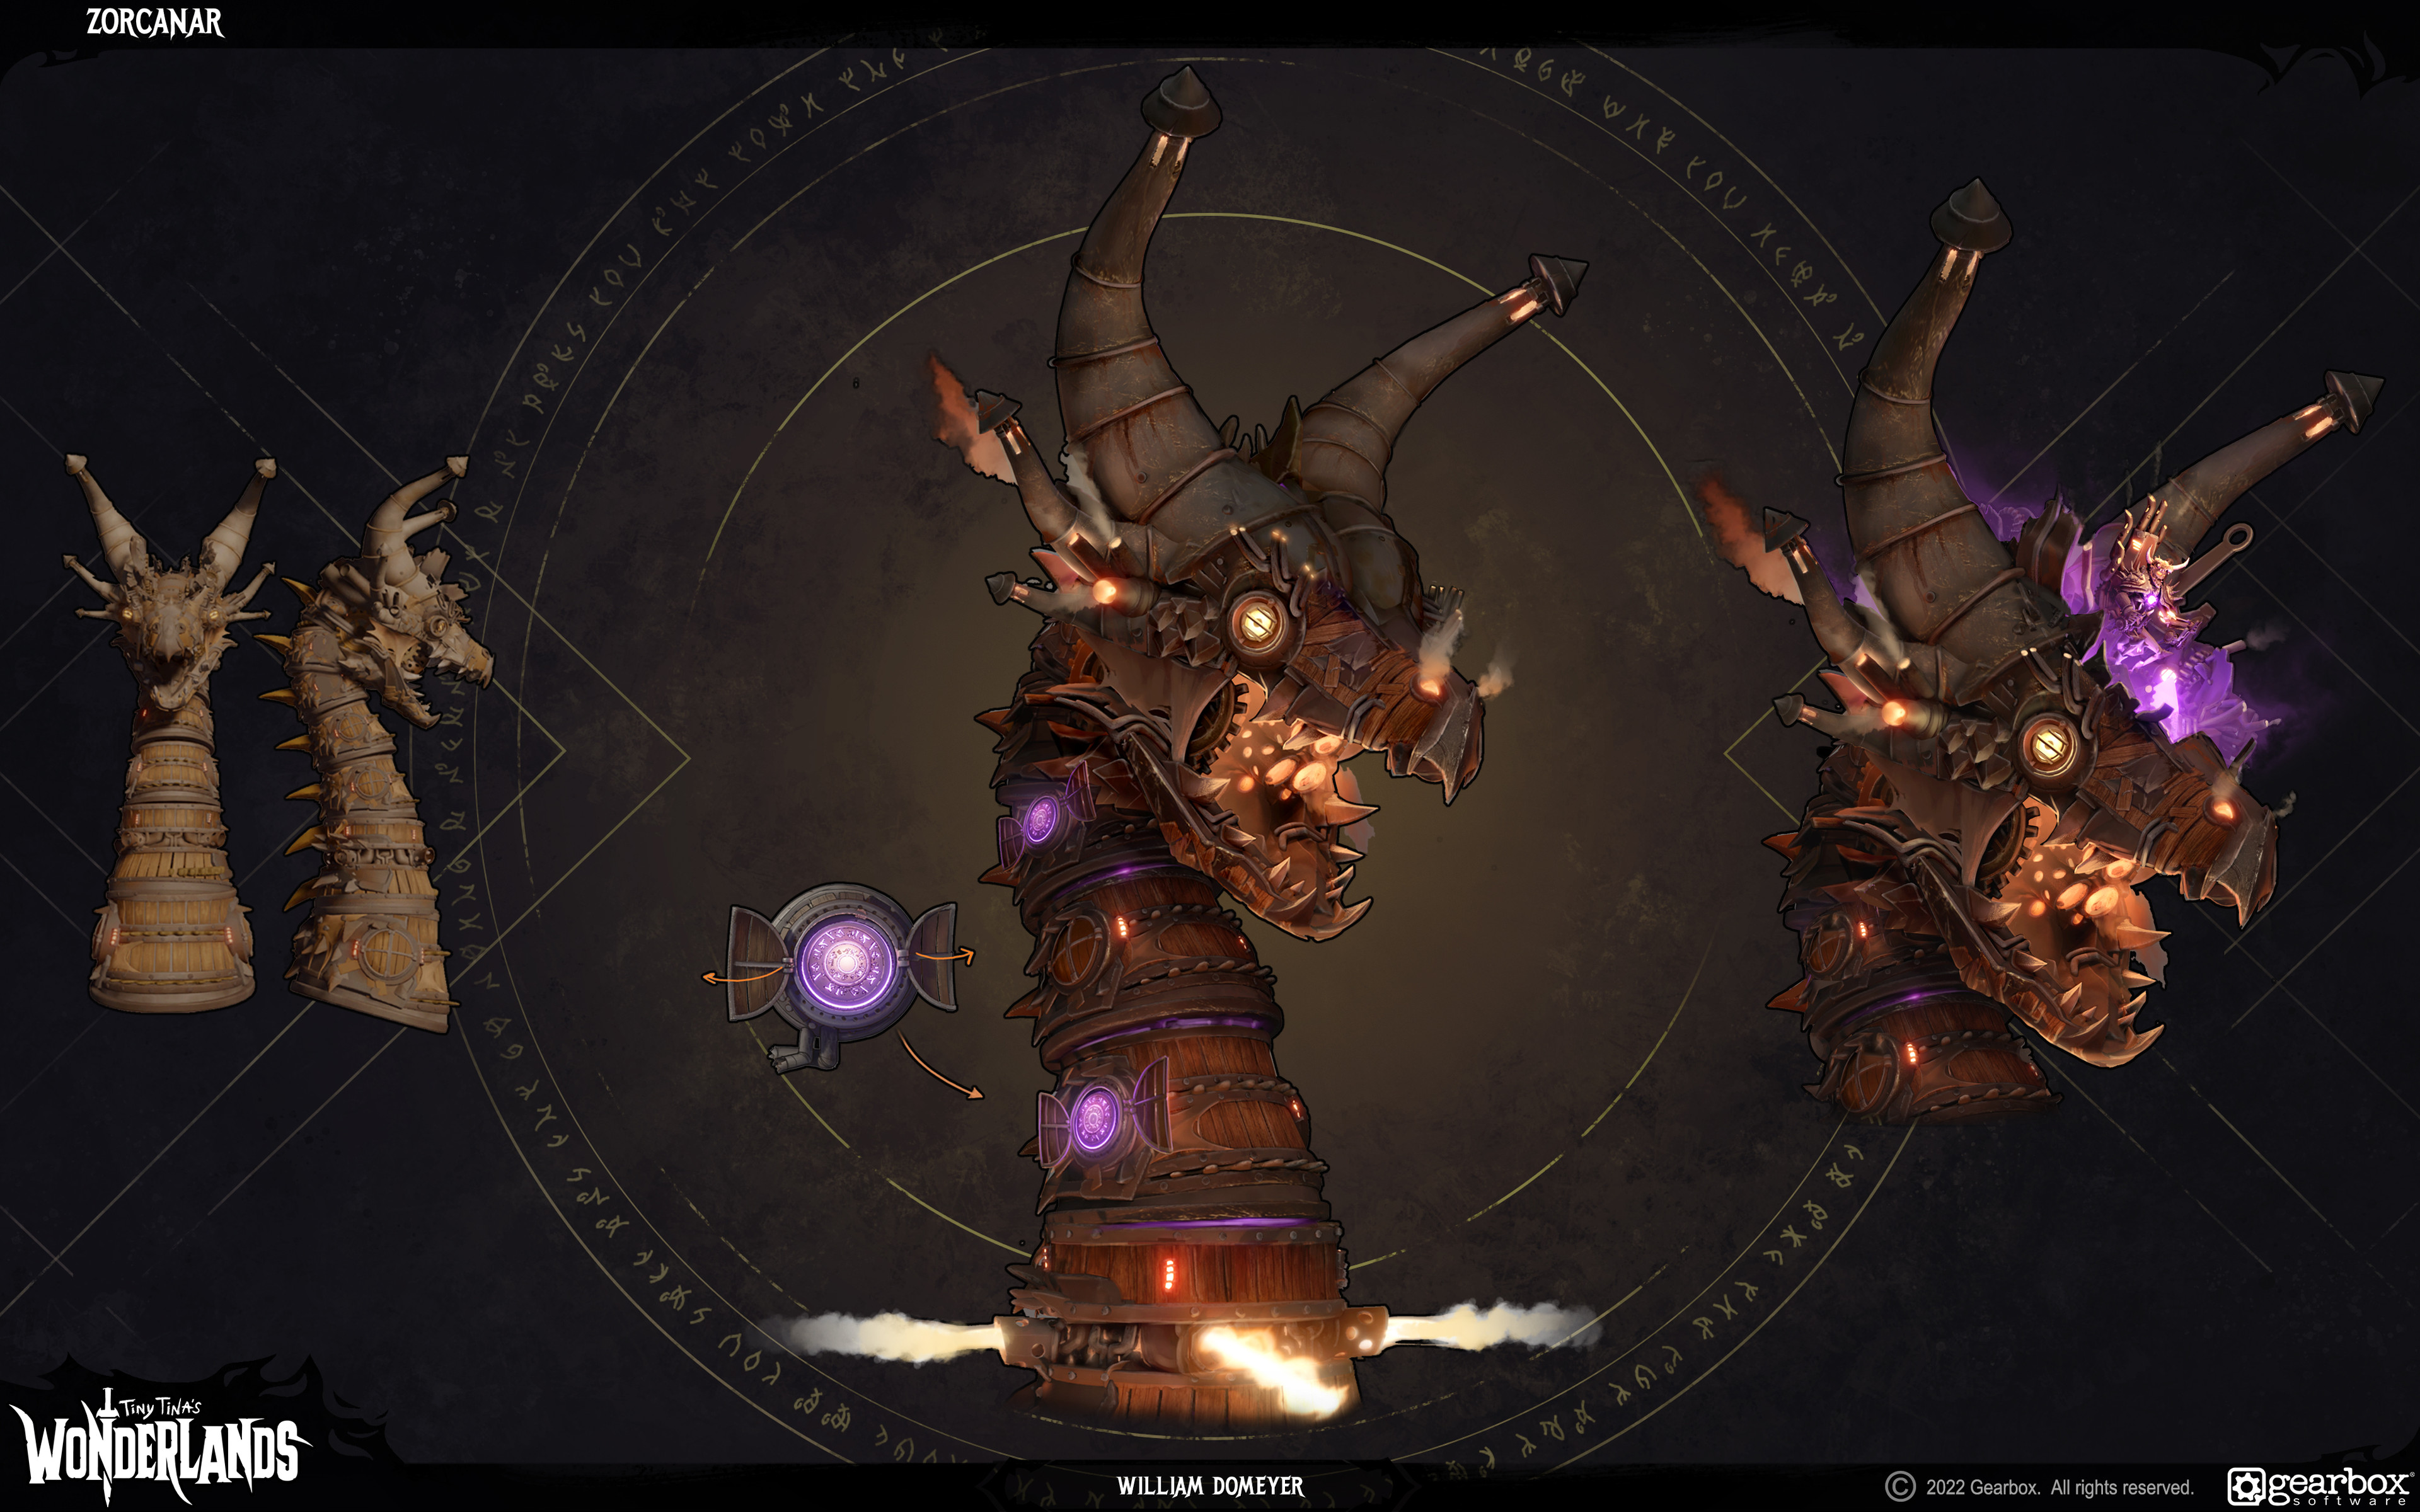 Vorcanar has multiple stages to his boss fight, including a section where you detonate a bomb on the dragon's head exposing the inner workings and a Dragon-Lord Lieutenant piloting the beast.